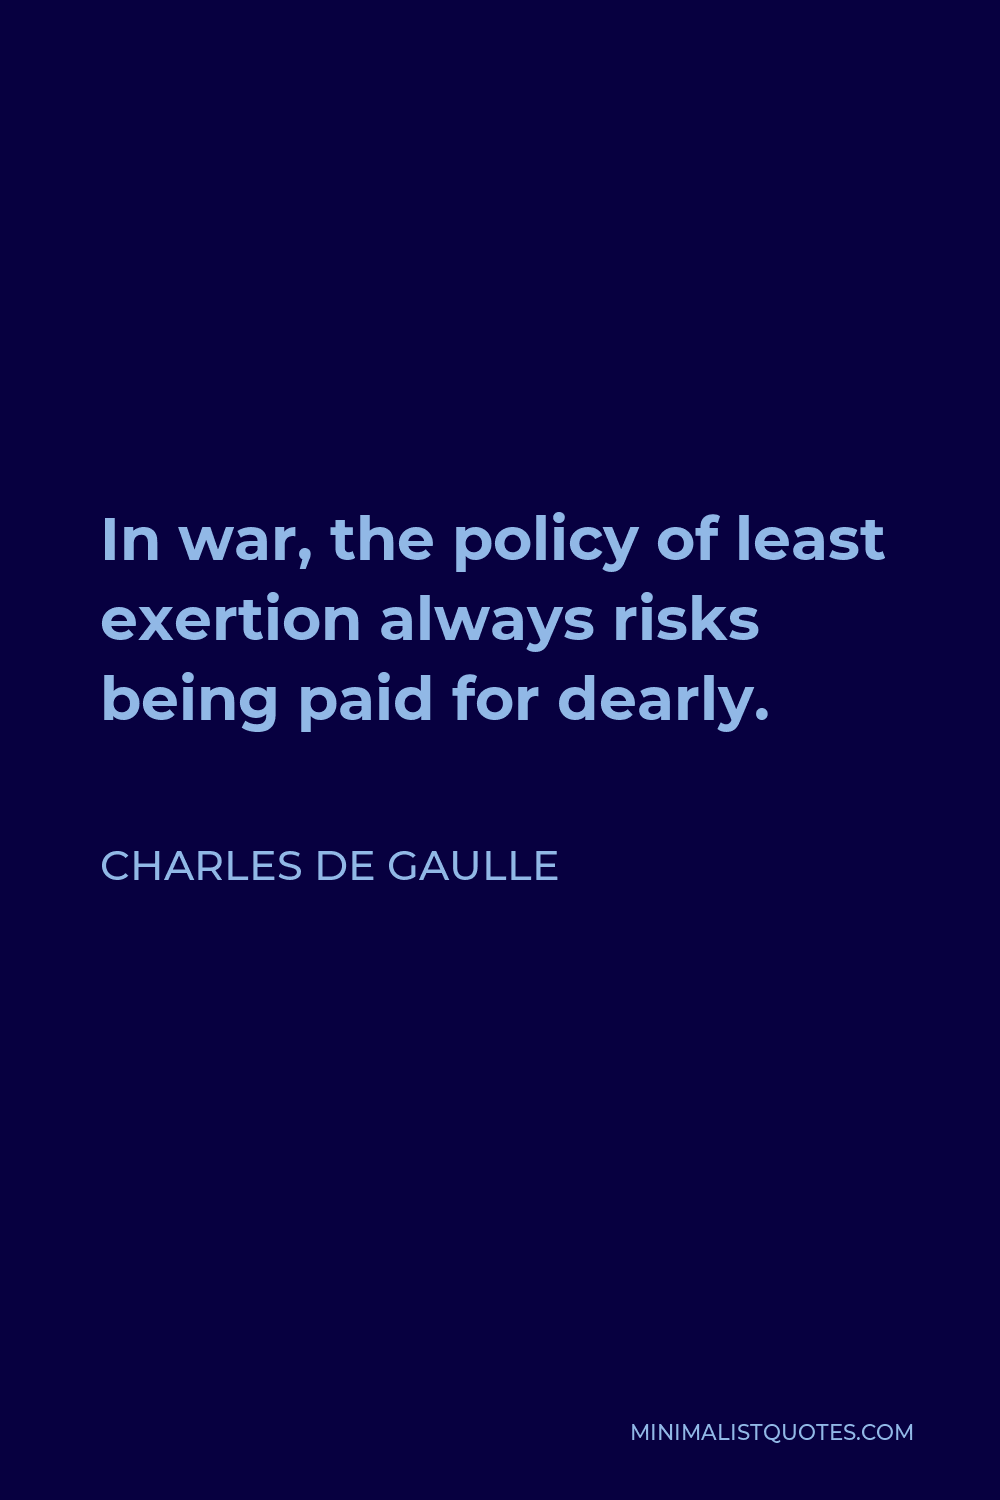 Charles de Gaulle Quote - In war, the policy of least exertion always risks being paid for dearly.